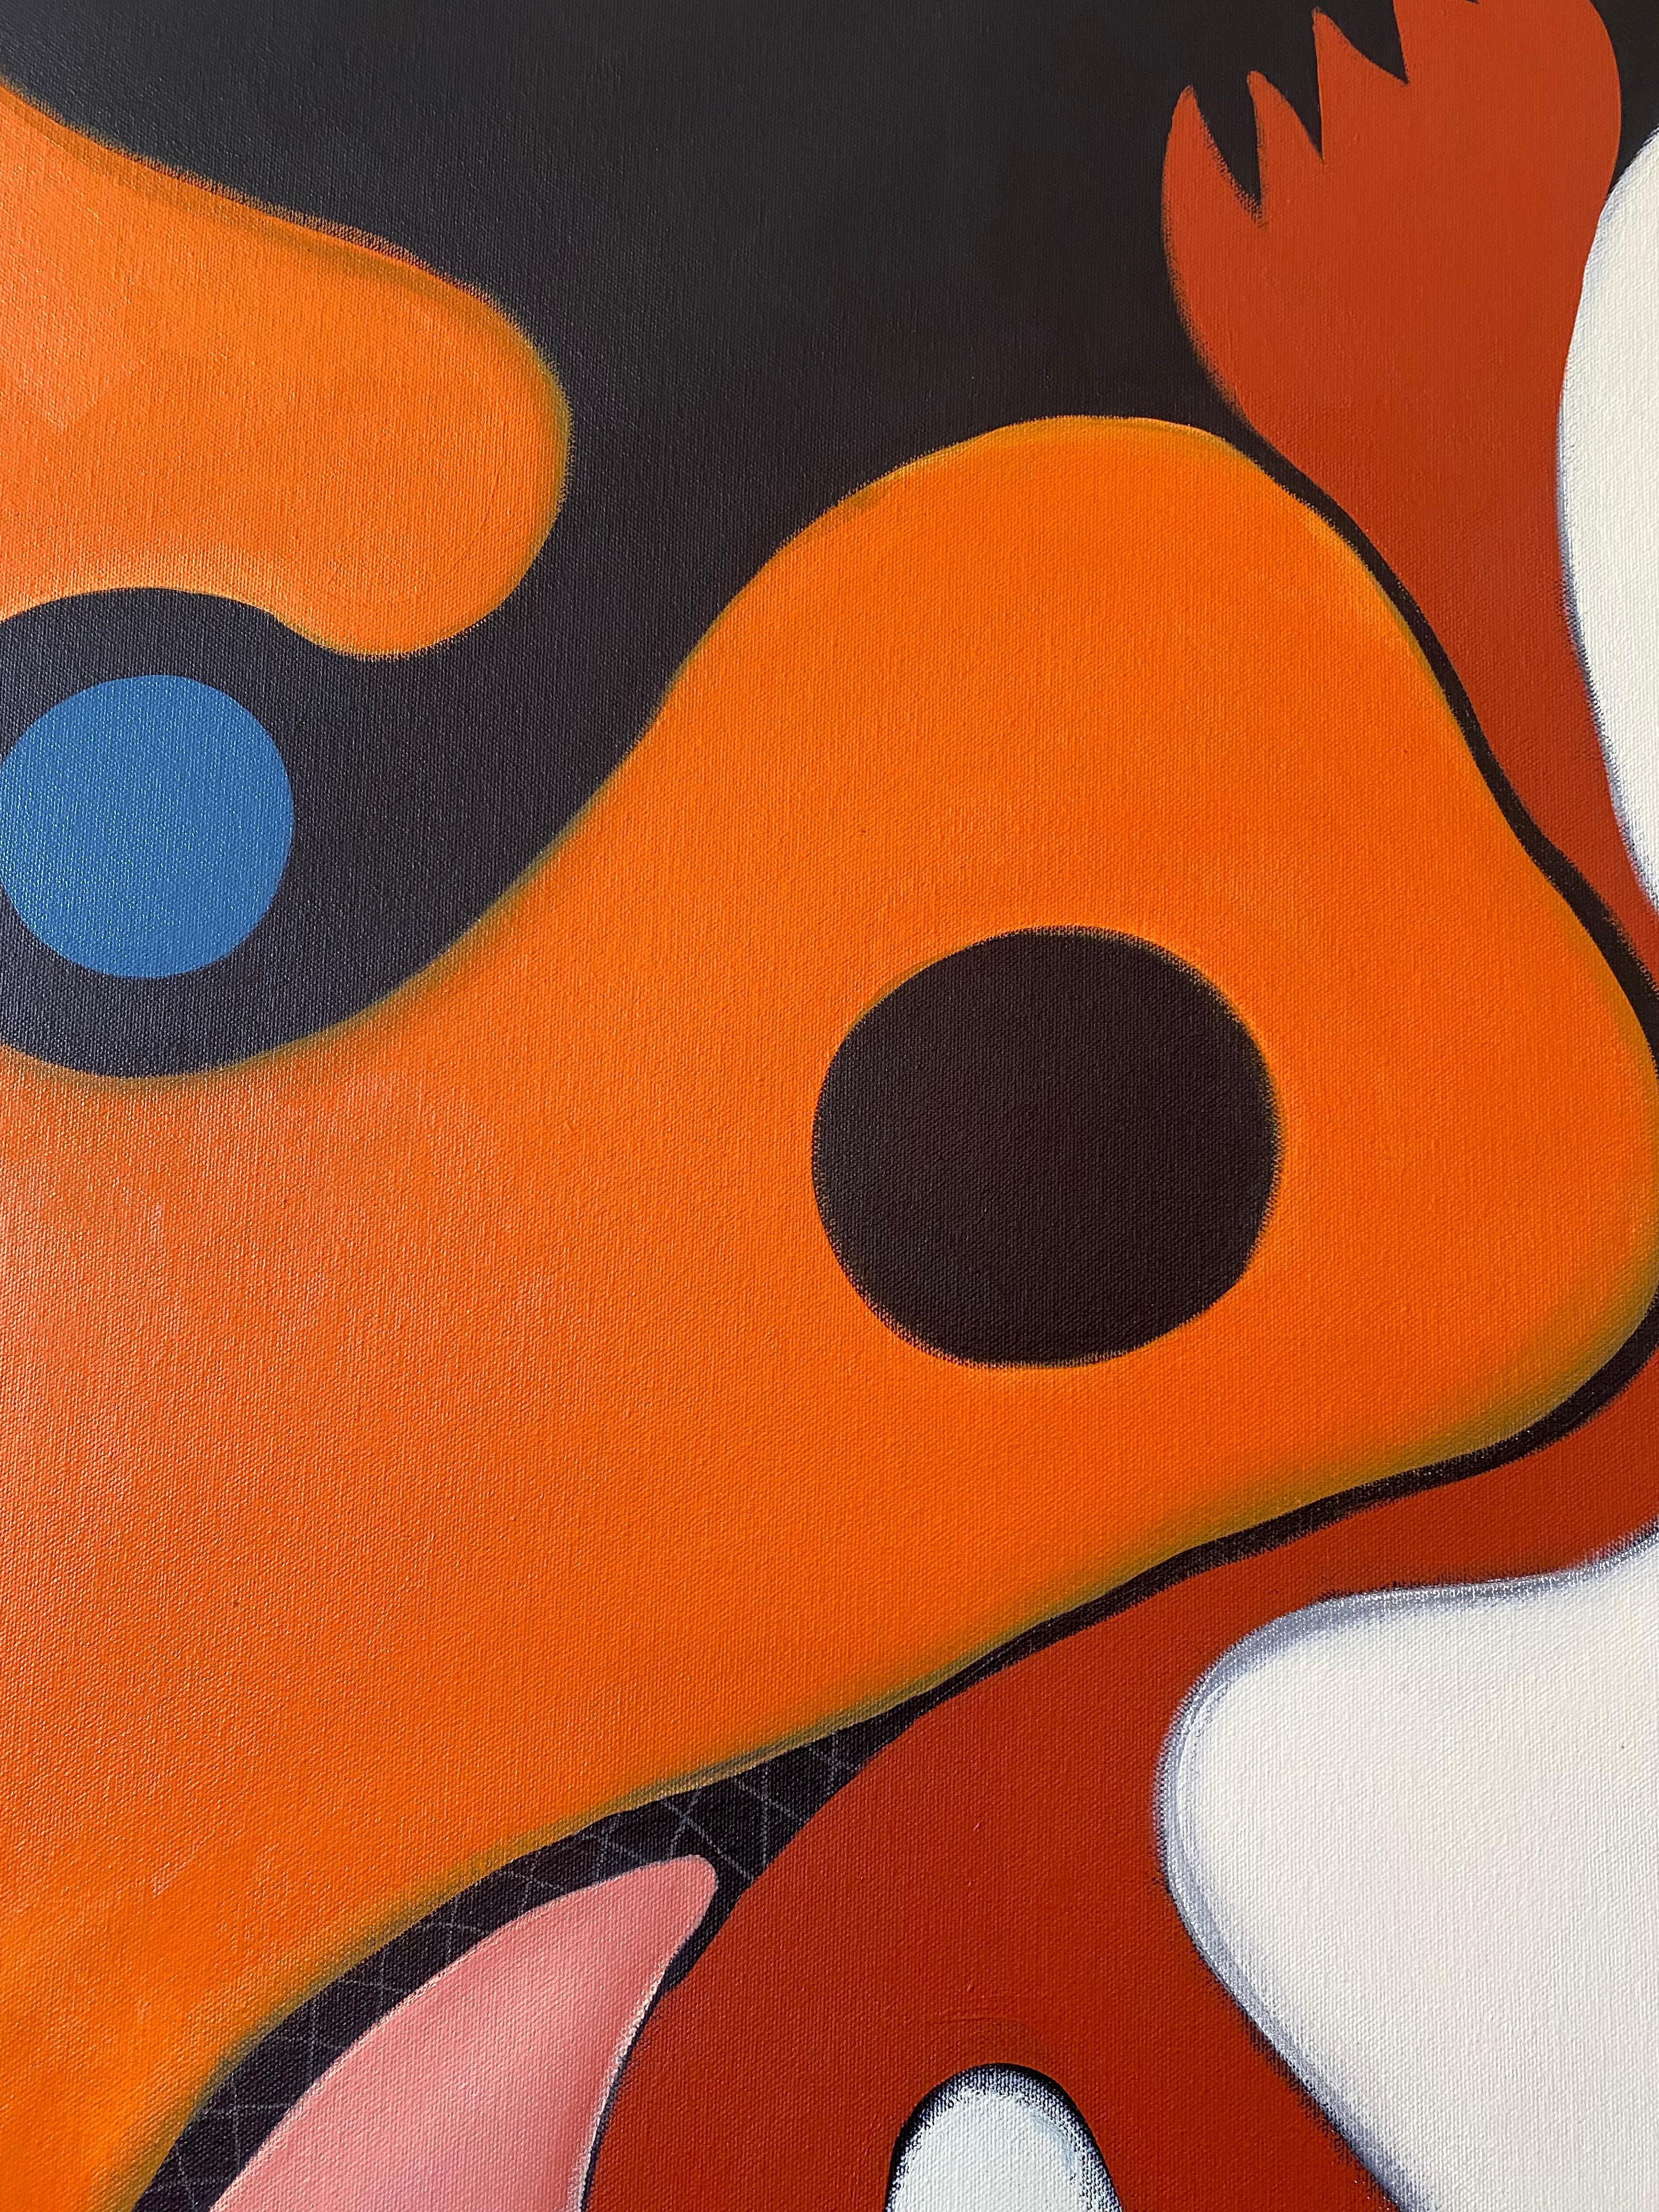 CONTRARY Square, painting, orange, large, abstract, bold 1